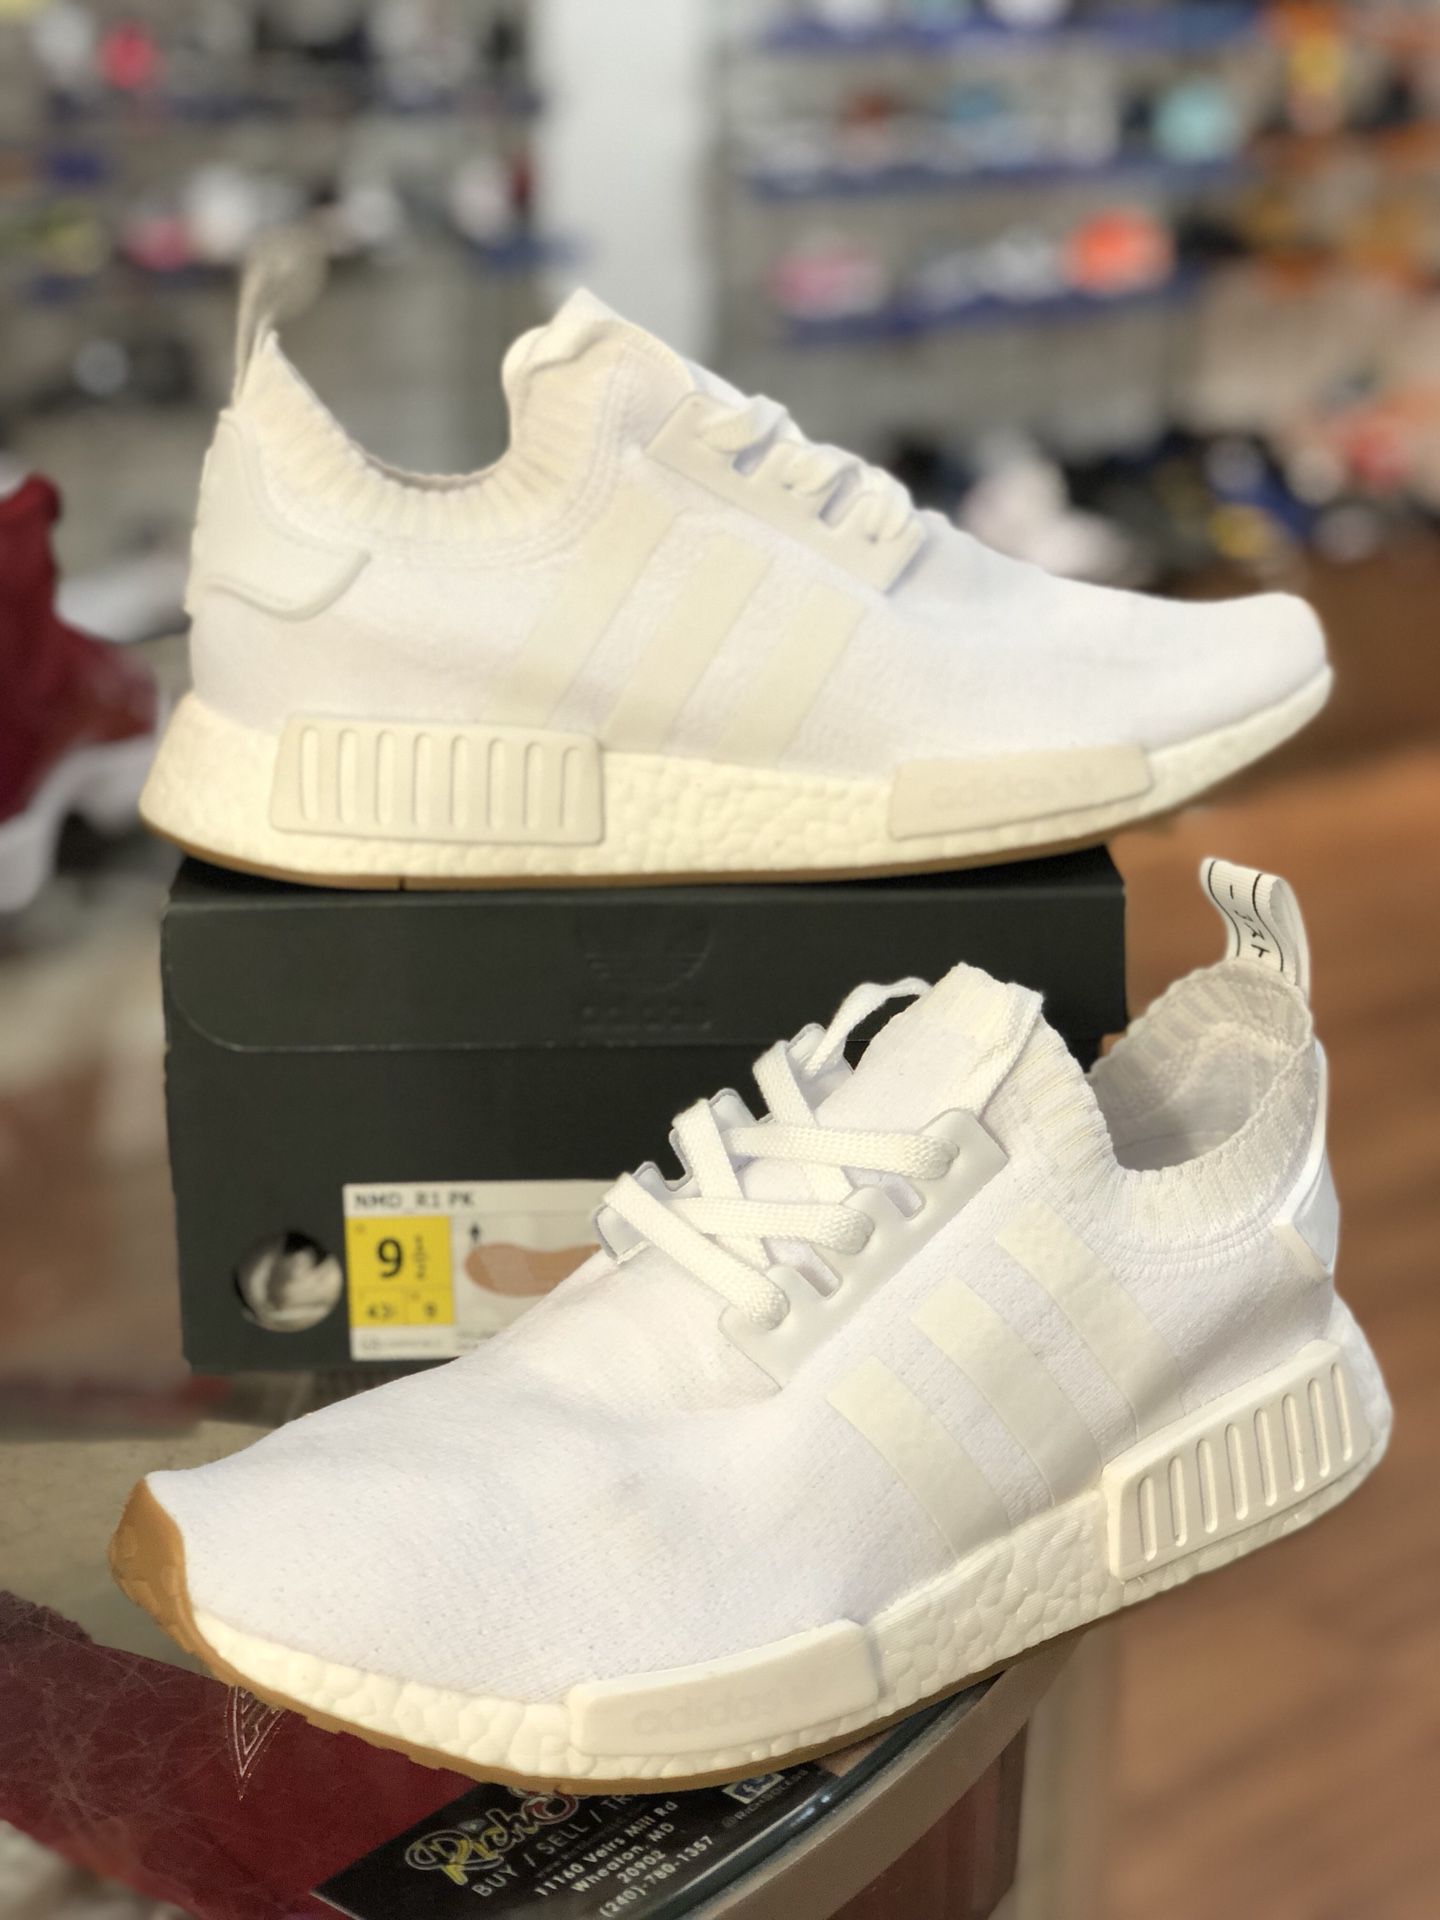 White gum pack Nmd R1 size 9.5